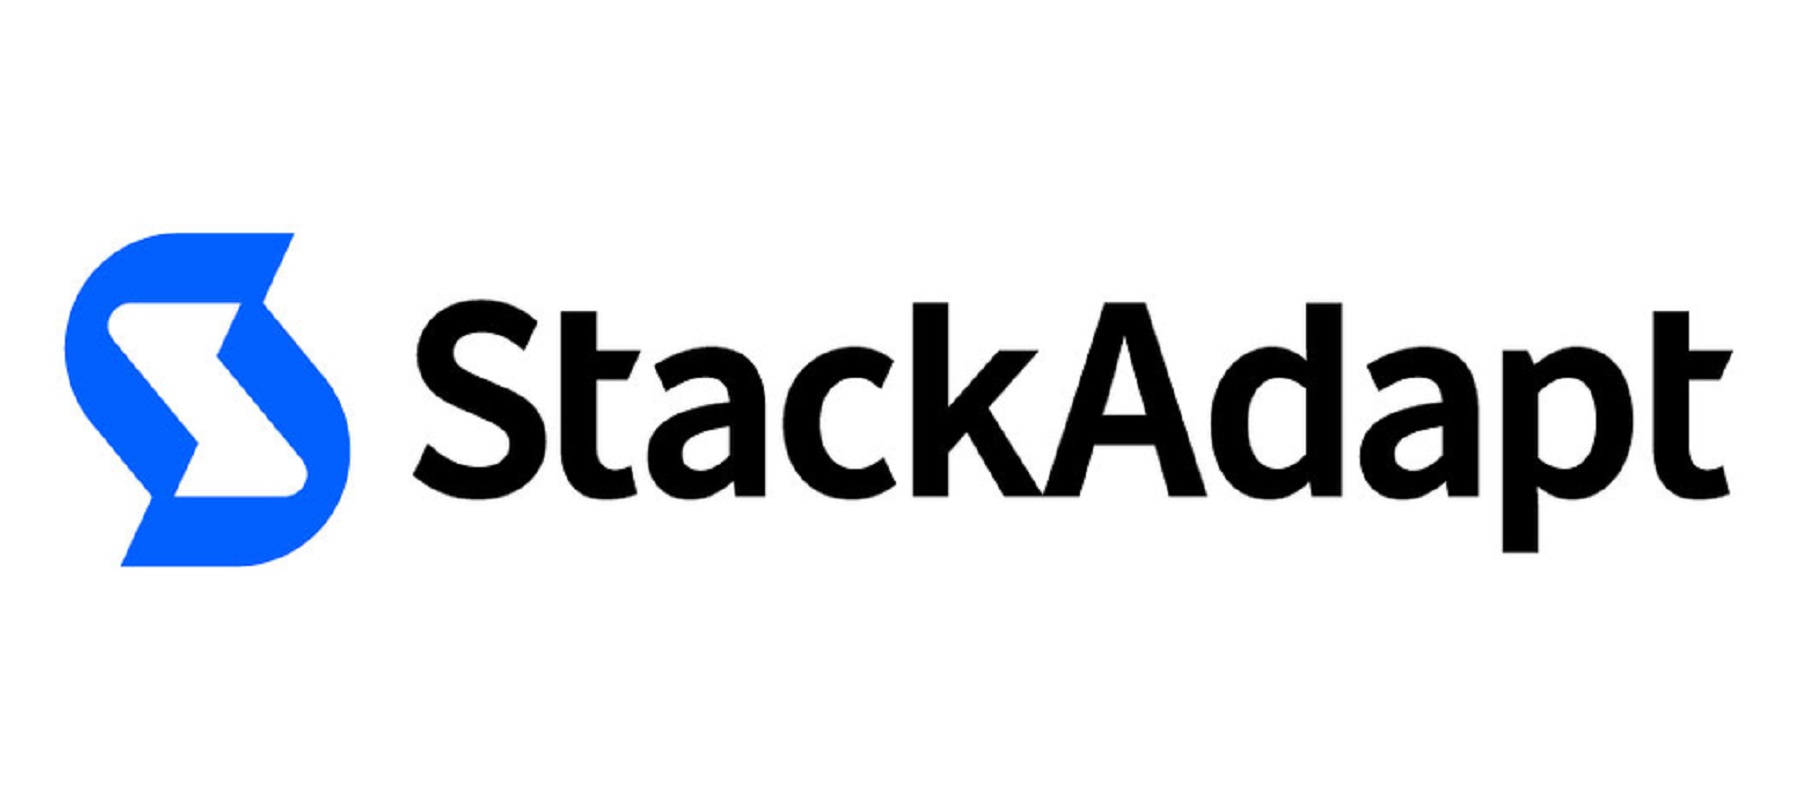 StackAdapt partners with Lead Forensics to empower B2B marketers targeting EMEA and Canadian markets